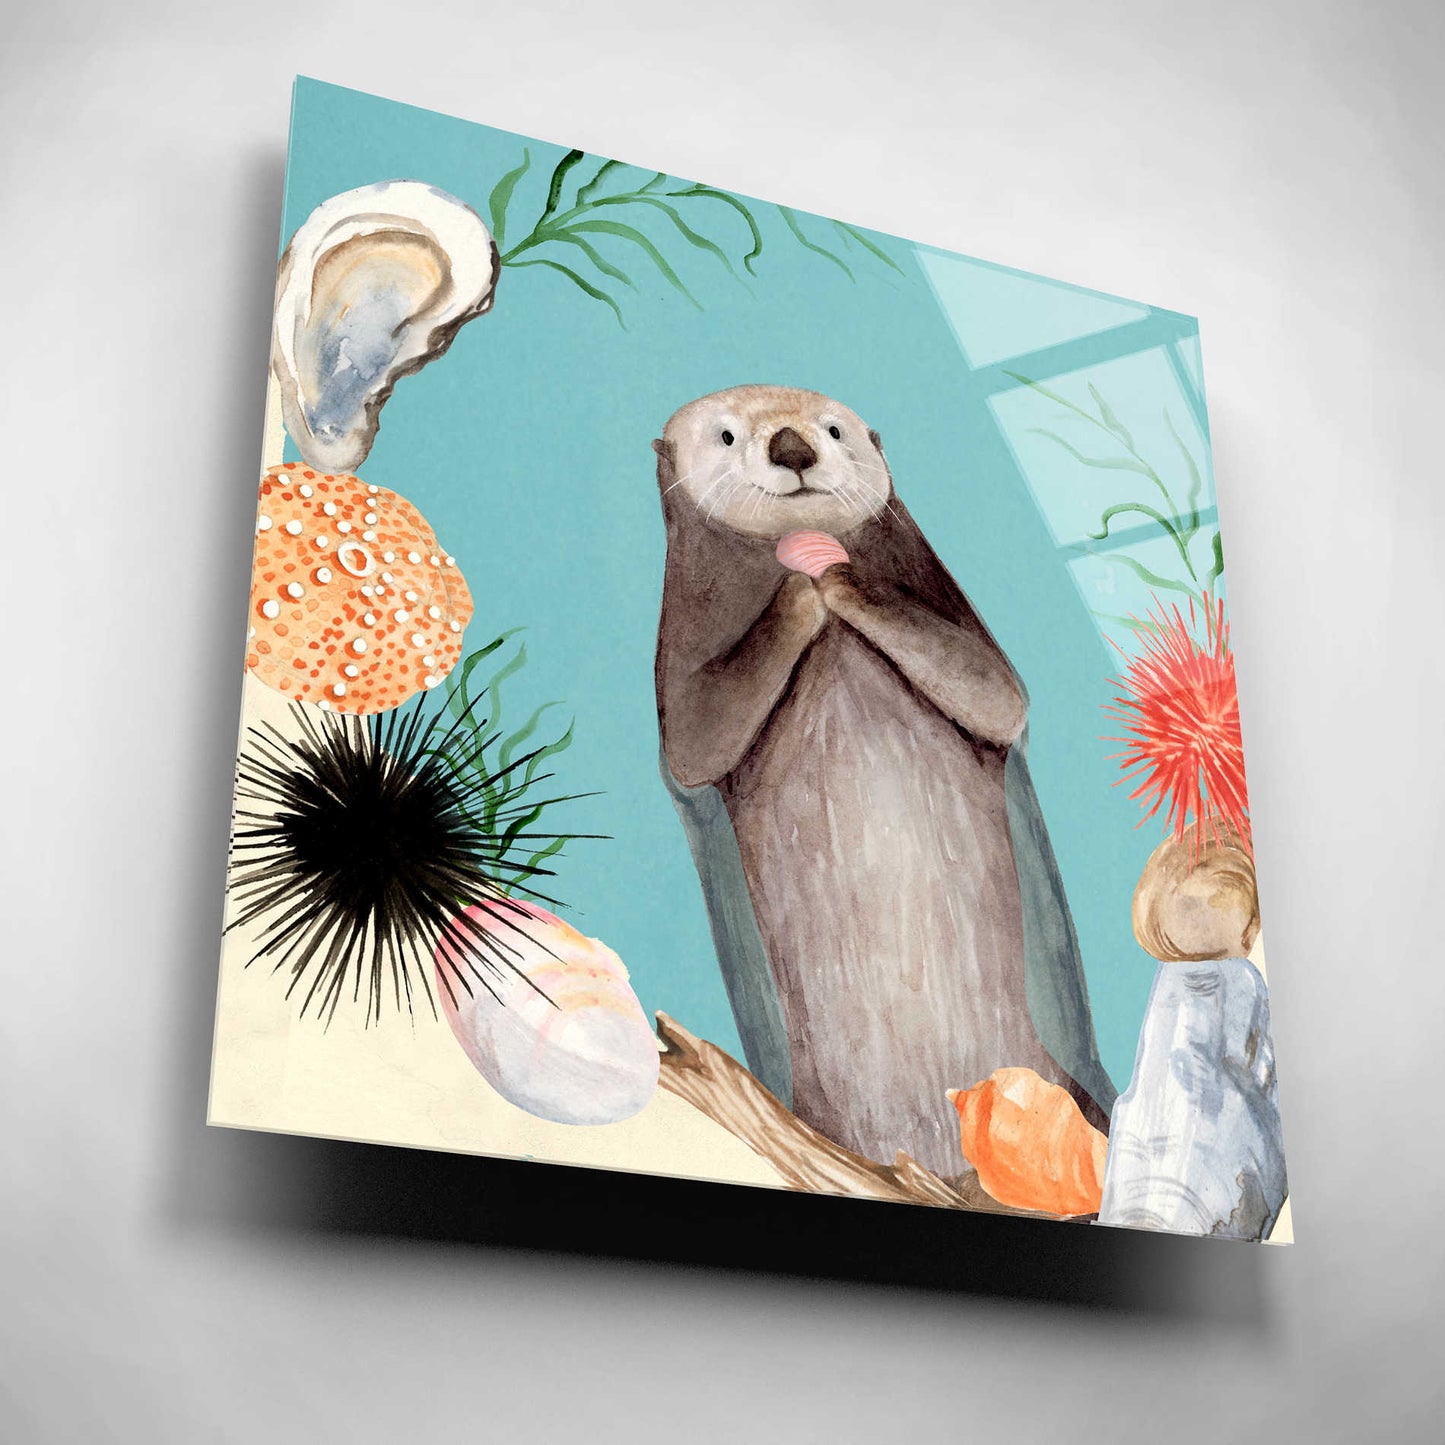 Epic Art 'Otter's Paradise II' by Victoria Borges, Acrylic Glass Wall Art,12x12